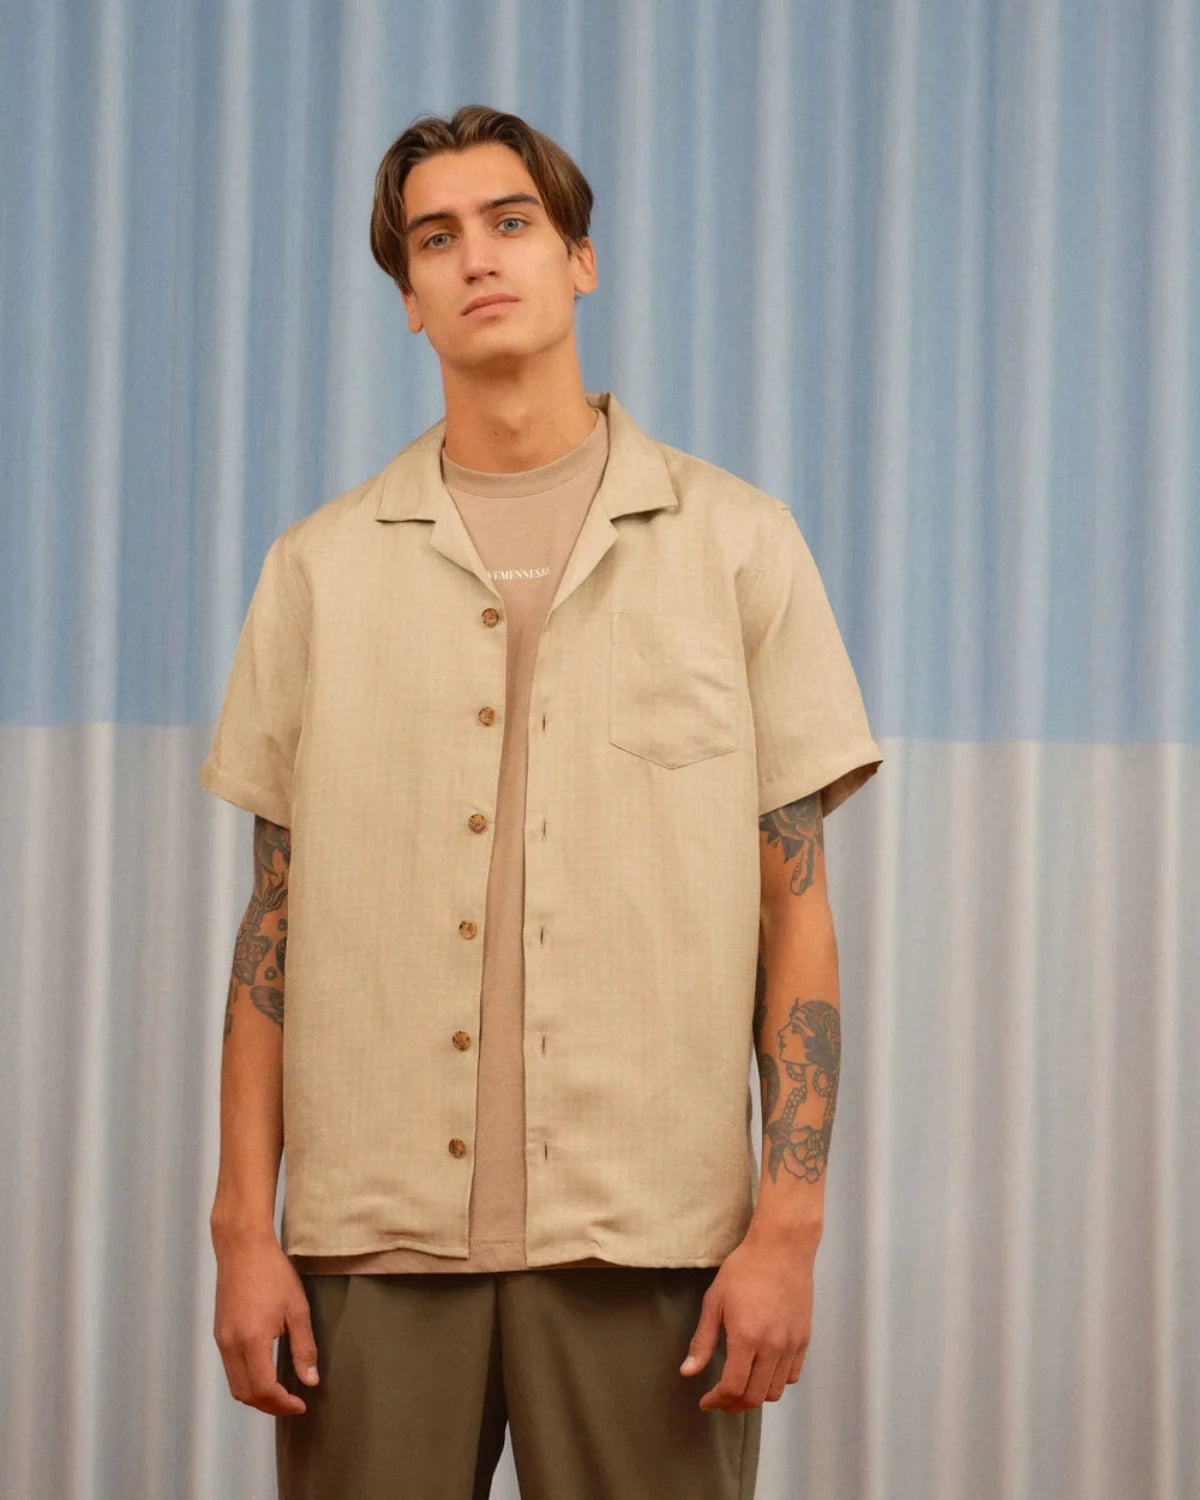 Cave 2342 SS Shirt - Taupe Check